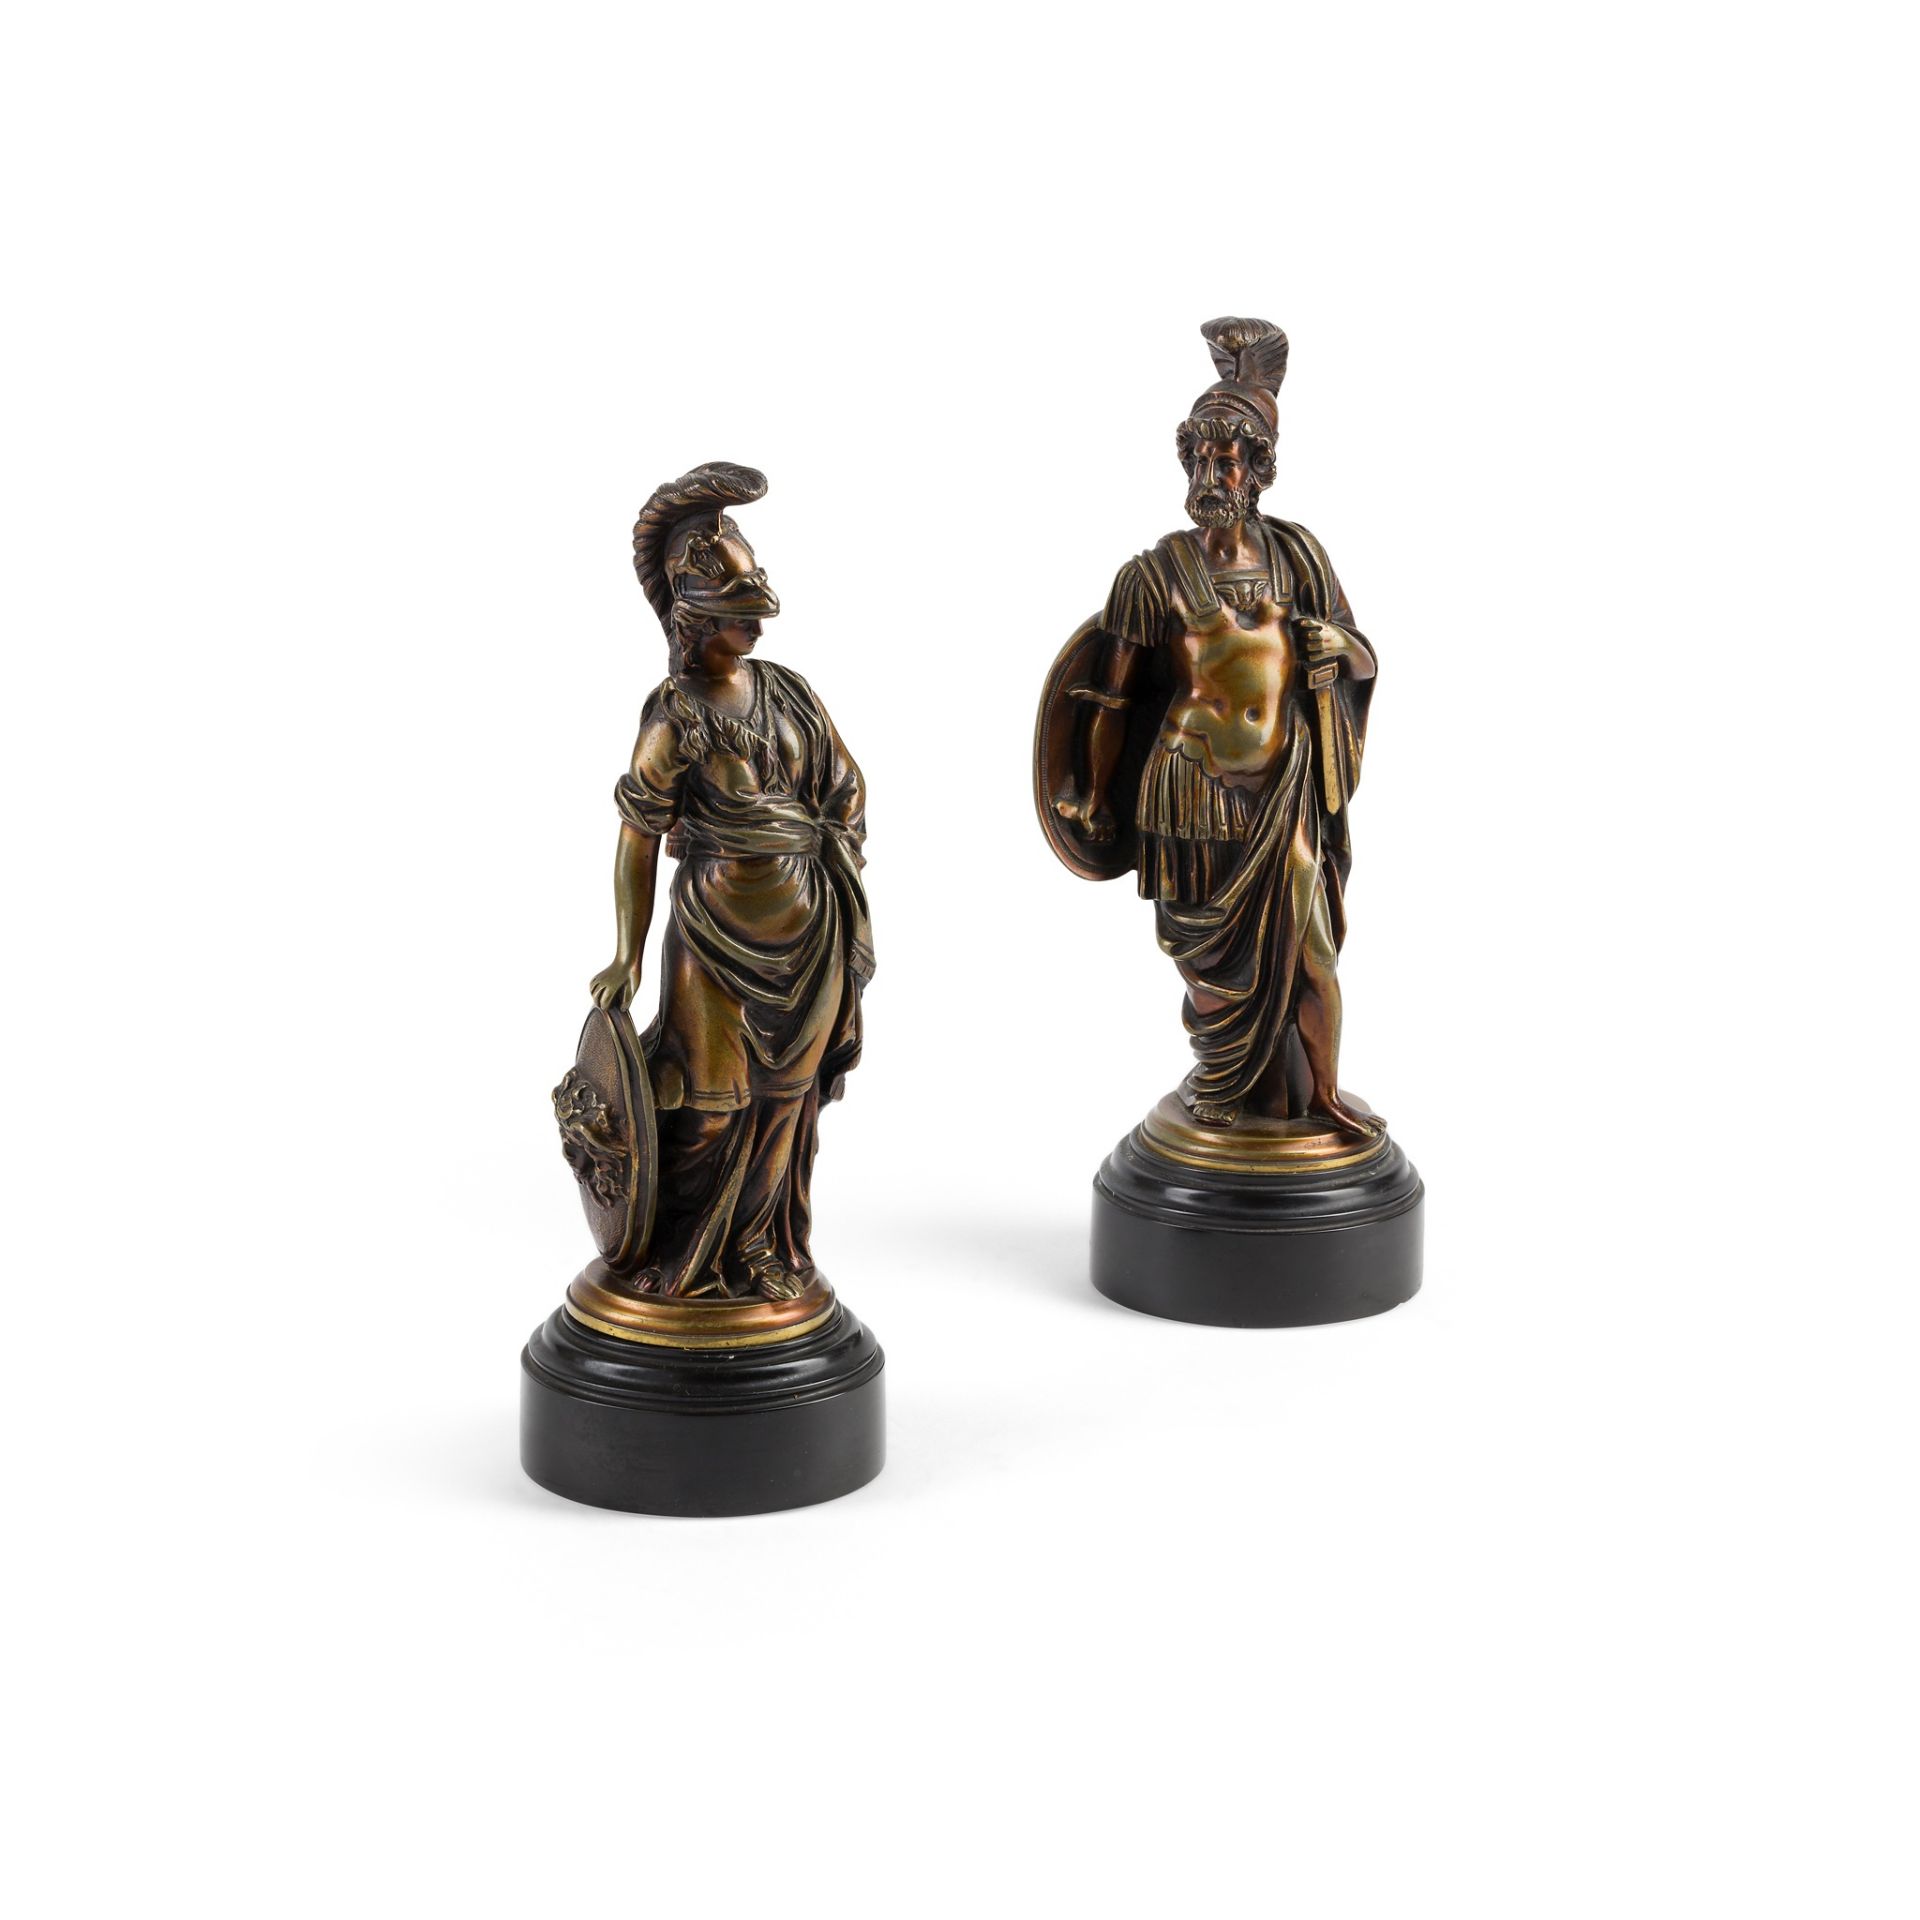 PAIR OF BRONZE FIGURES OF MARS AND MINERVA LATE 19TH CENTURY